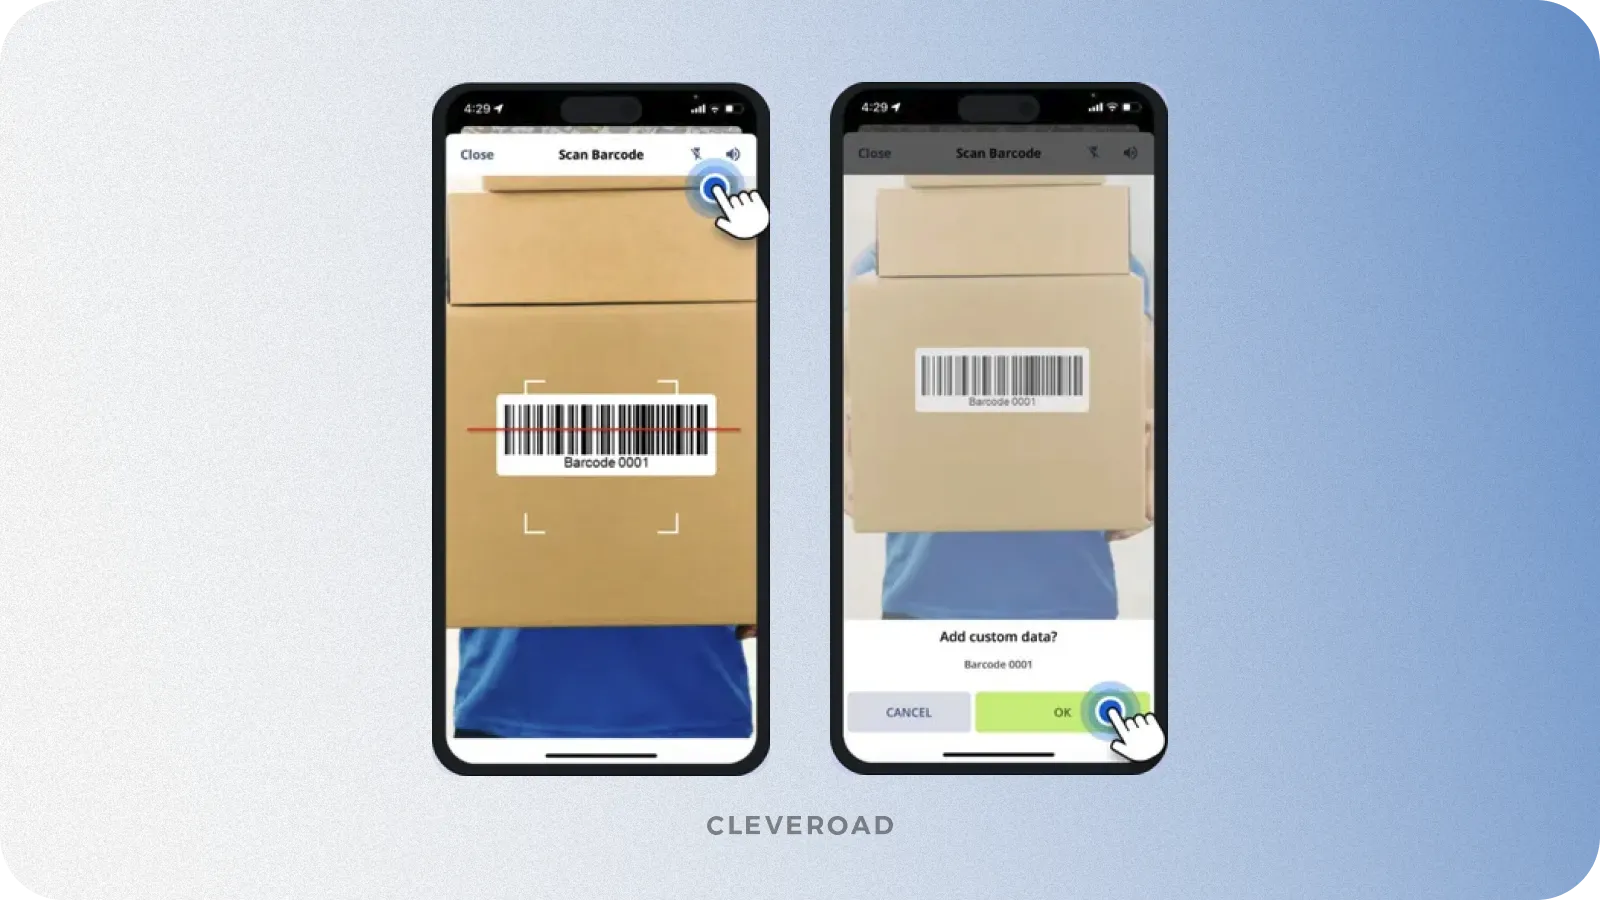 Barcode scanning (source: Route4me)